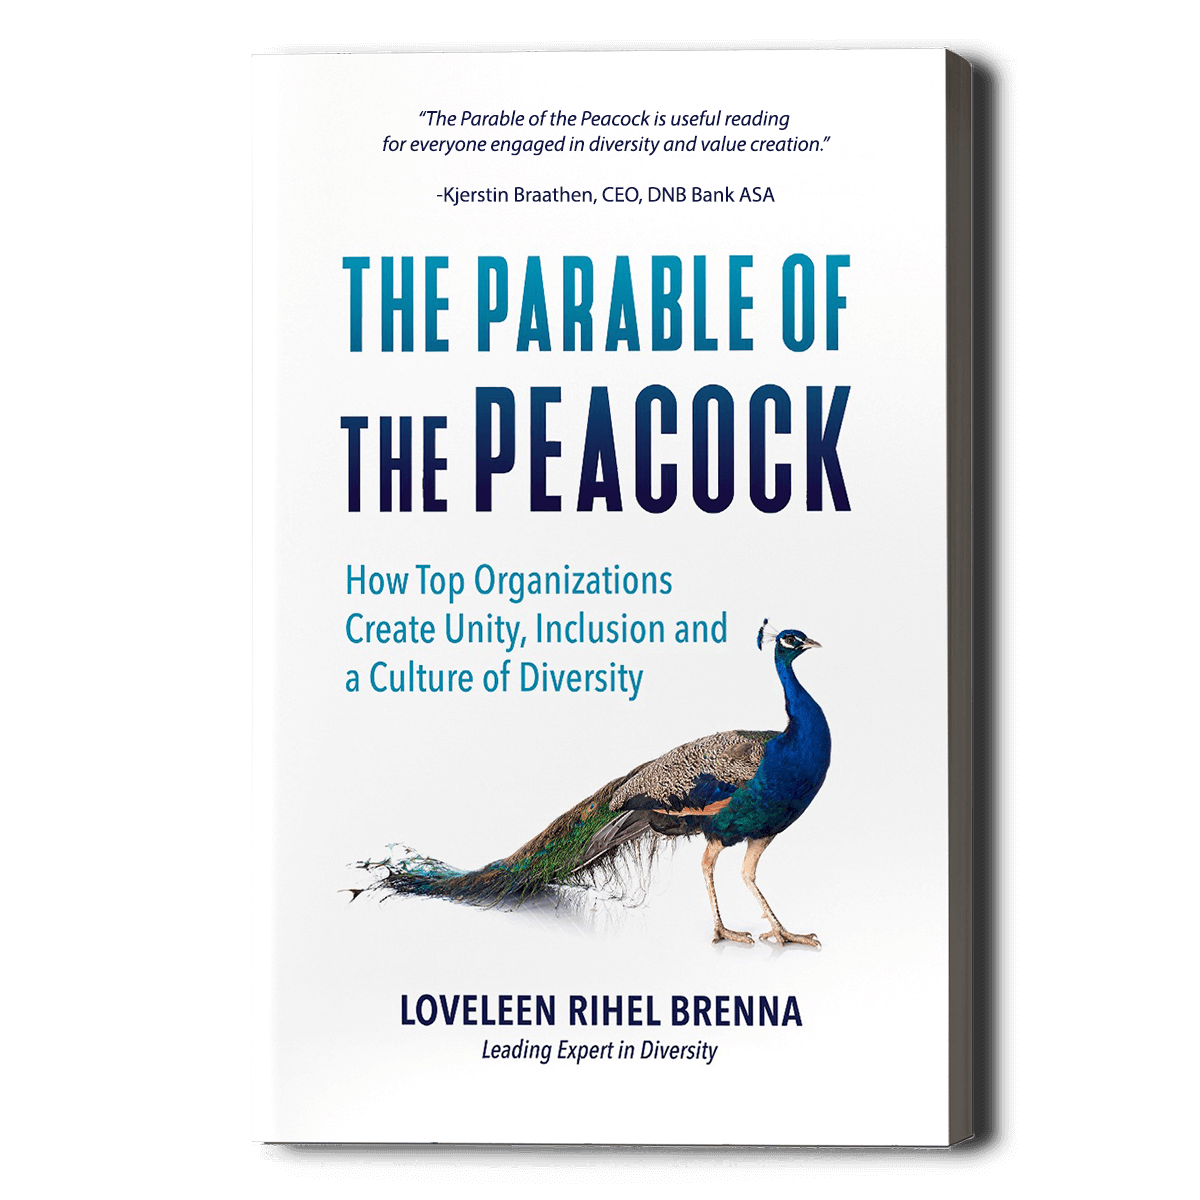 The Parable of the Dog and the Peacock